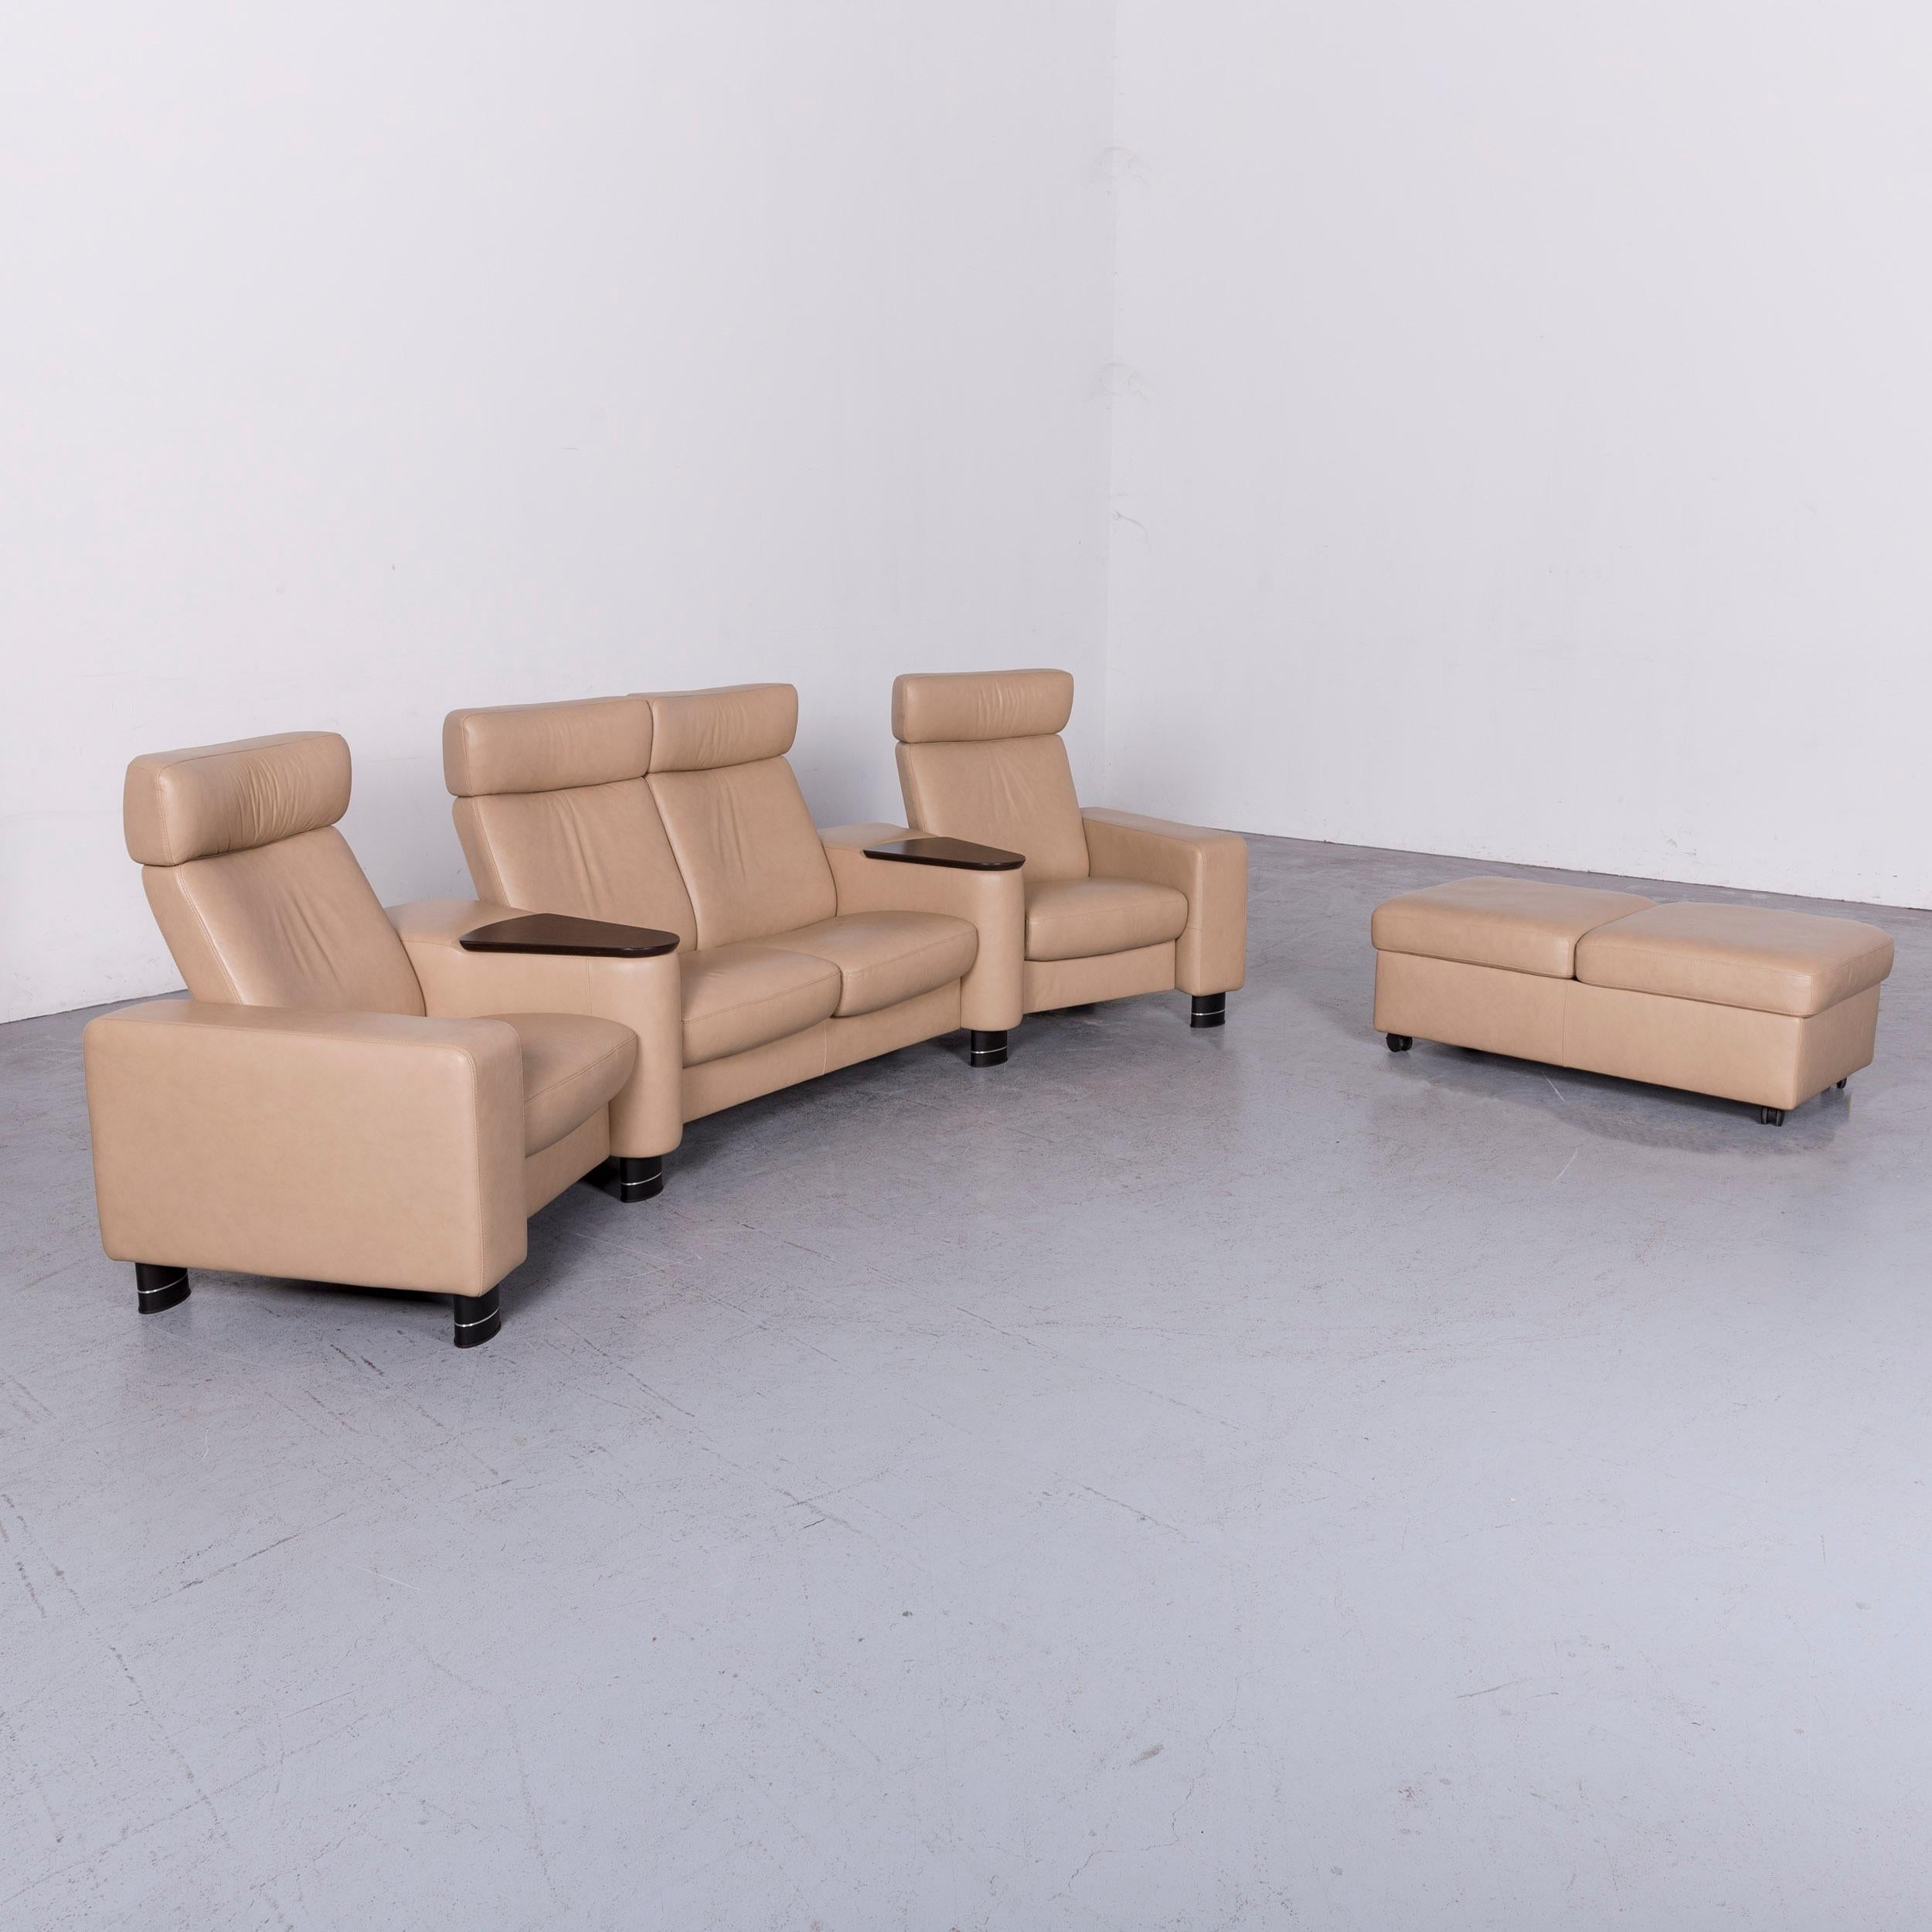 We bring to you an ekornes stressless designer leather sofa beige four-seat recliner couch. 
















